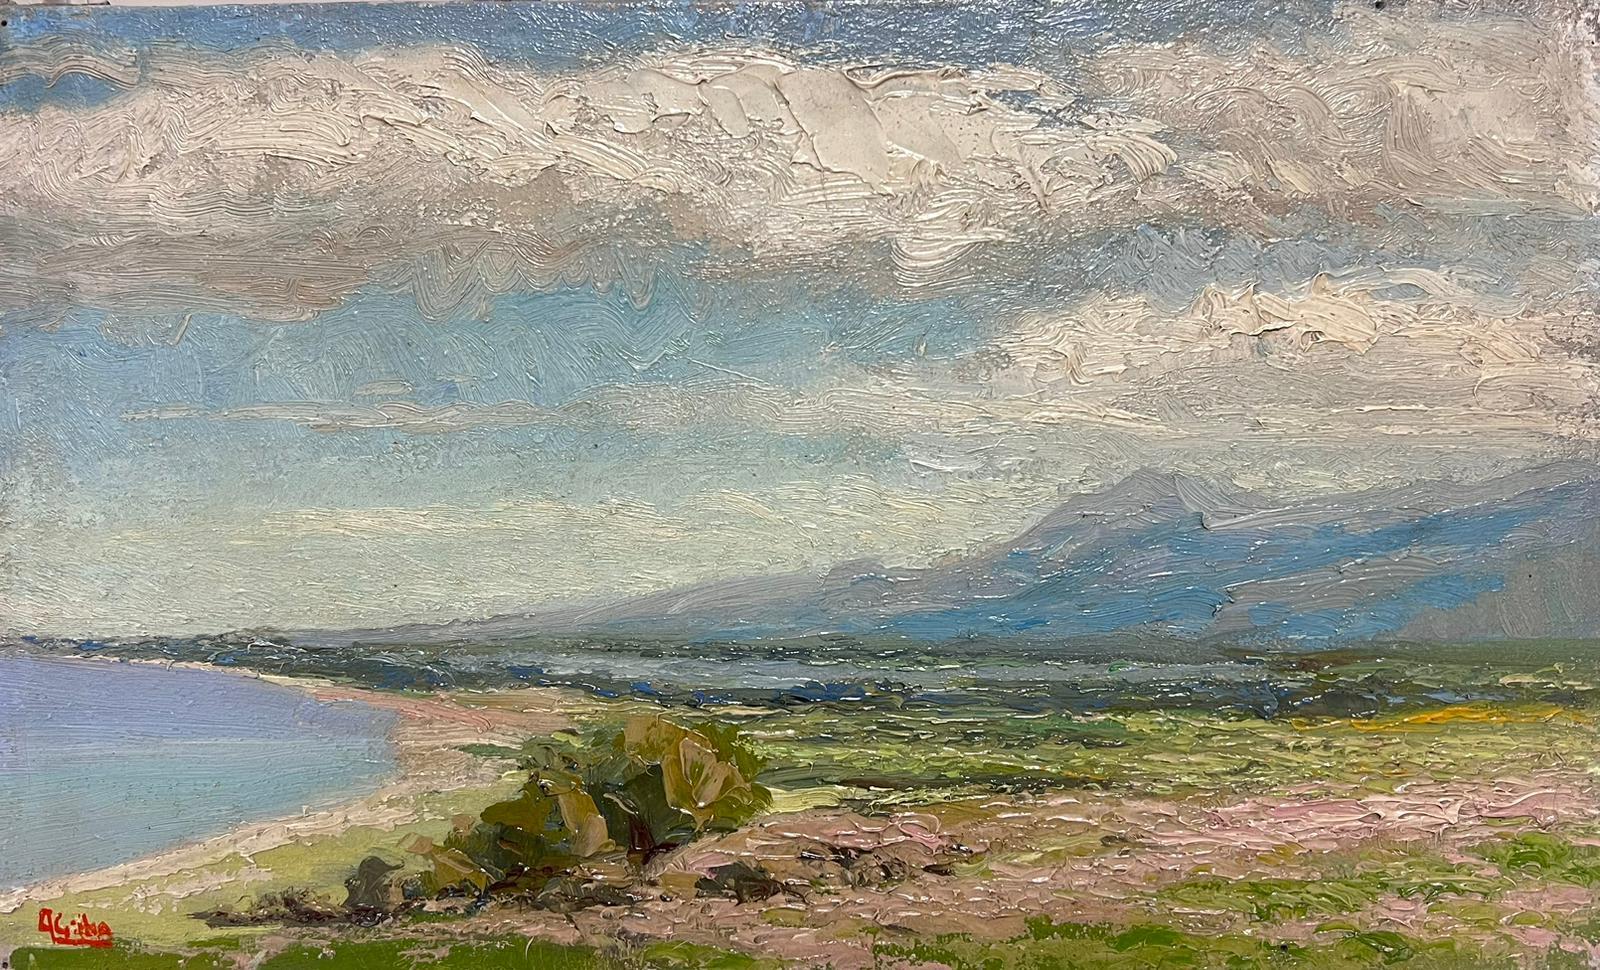 The Italian Coastline
Italian School, circa 1900's
indistinctly signed
signed oil on canvas, unframed
canvas : 10 x 16 inches
provenance: private collection
condition: very good and sound condition